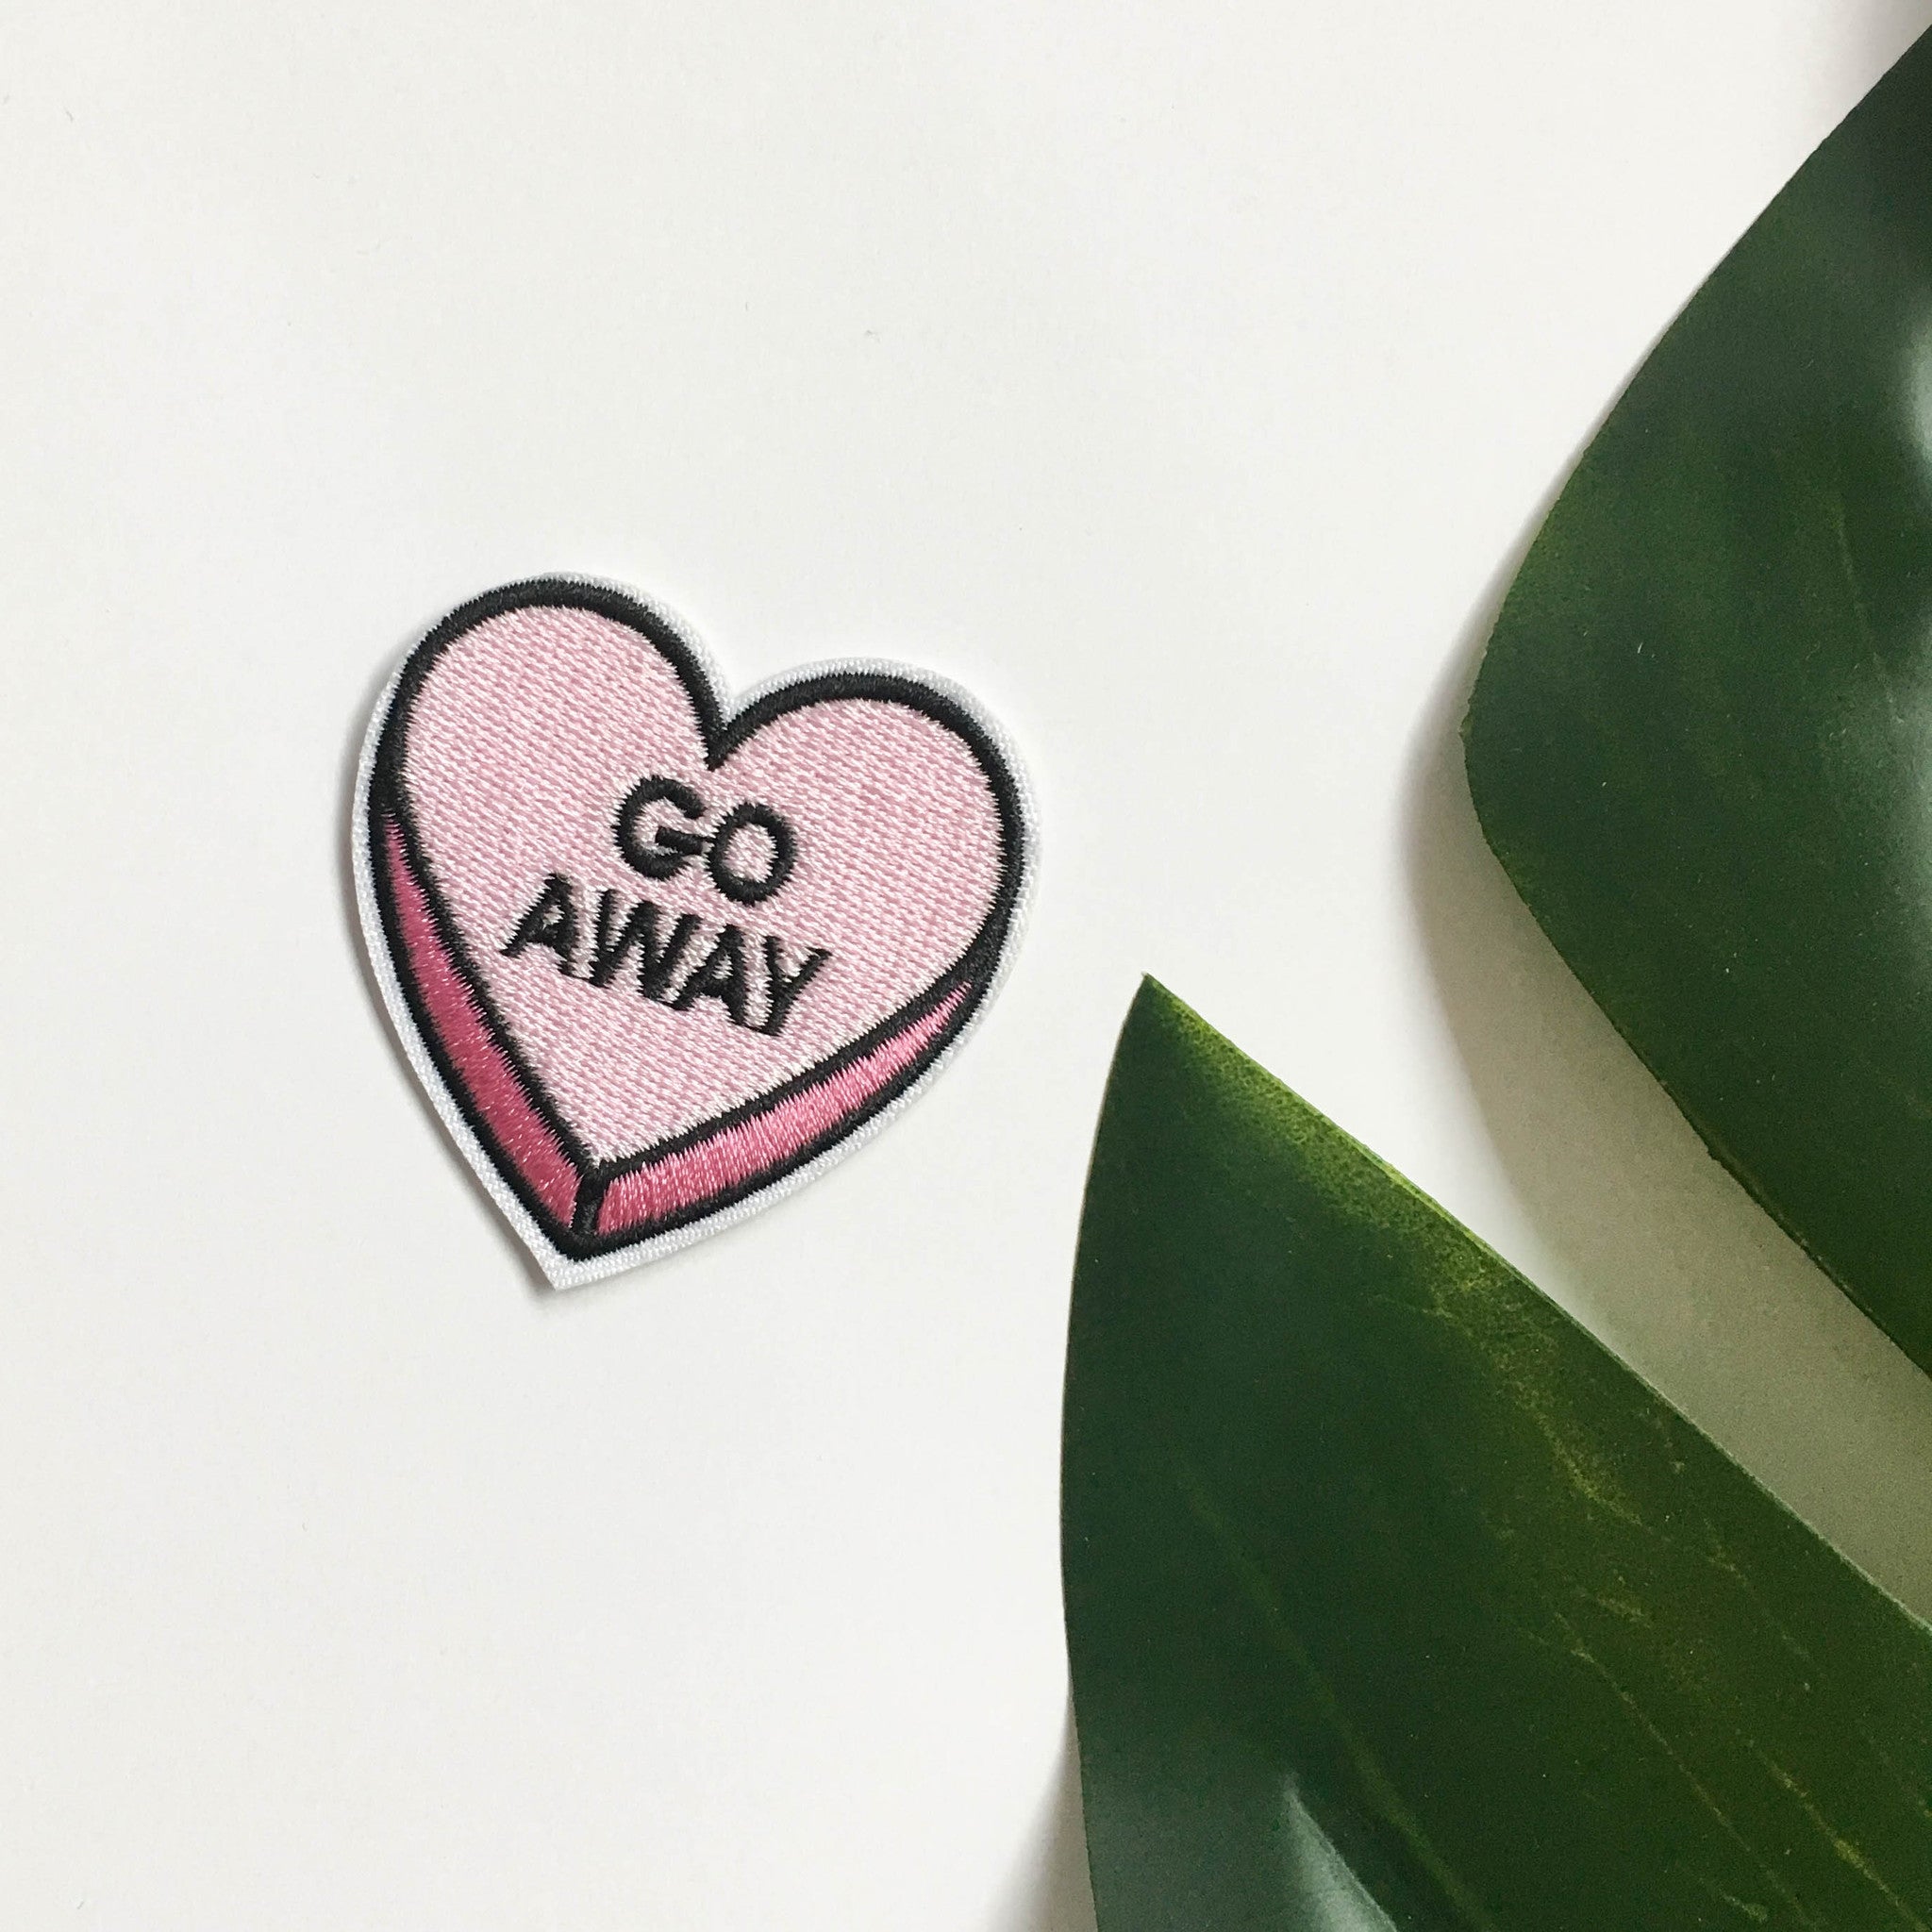 Iron on patches - Go away